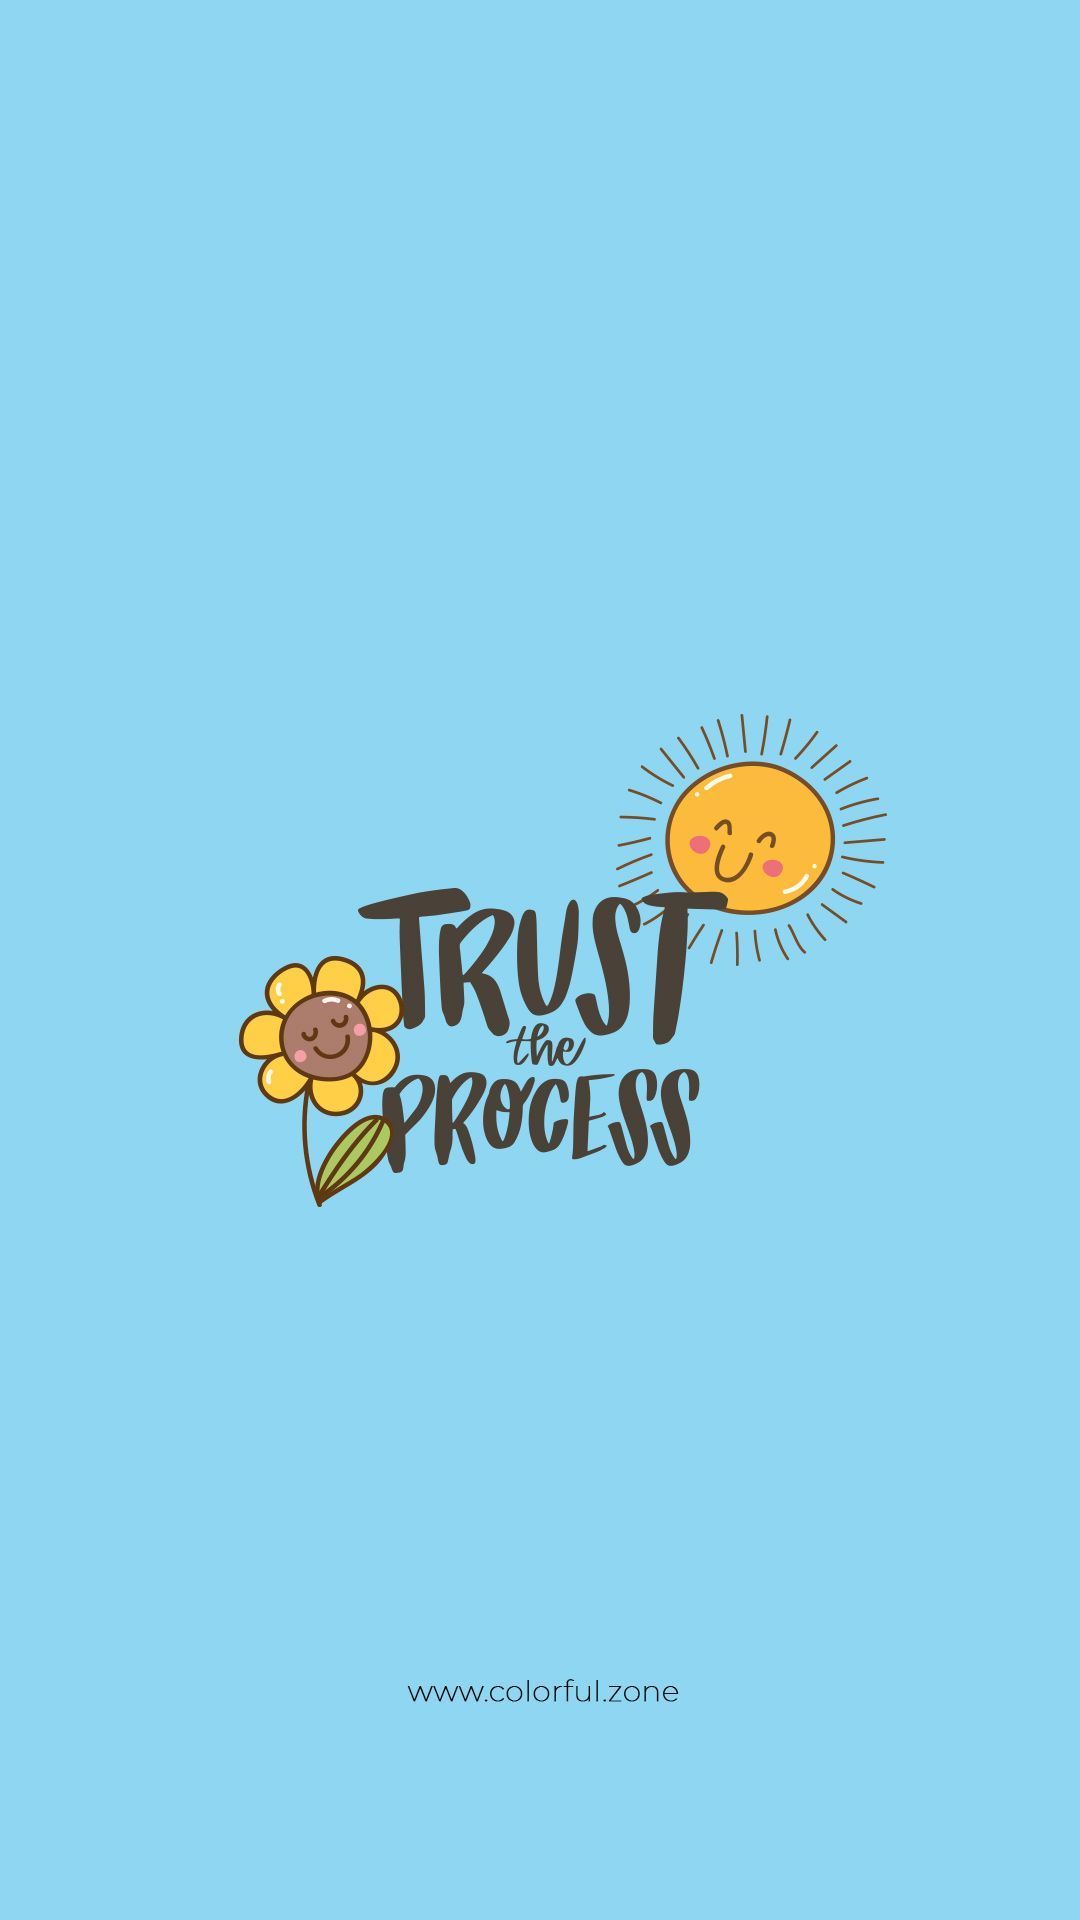 Phone wallpaper Quotes #Trust the process#  Phone wallpaper quotes,  Wallpaper quotes, Trust the process quotes